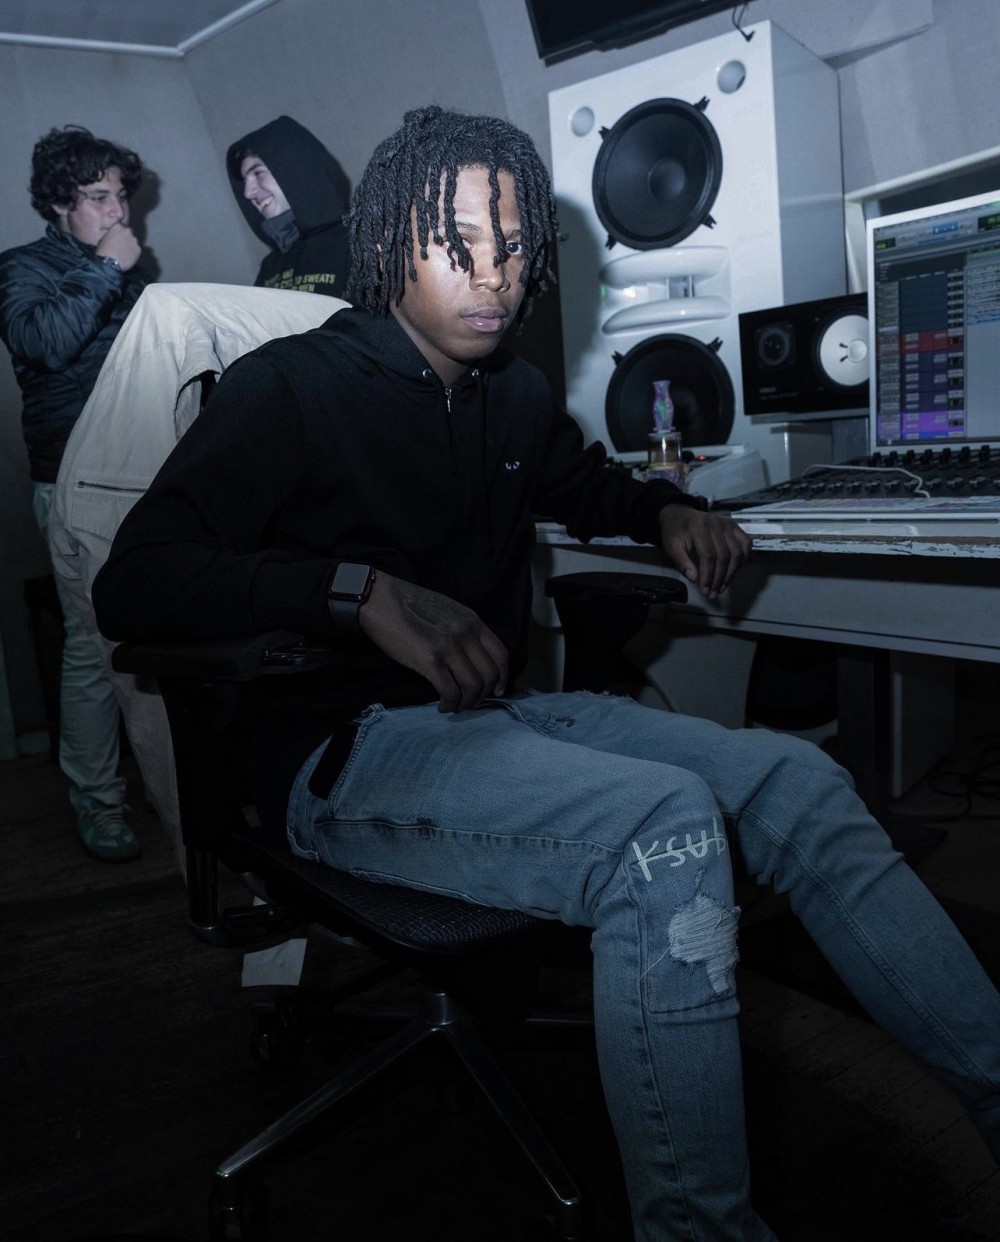 Meet Lil Mav: A Bronx-Based Hip-Hop Producer Taking the Music Industry by Storm